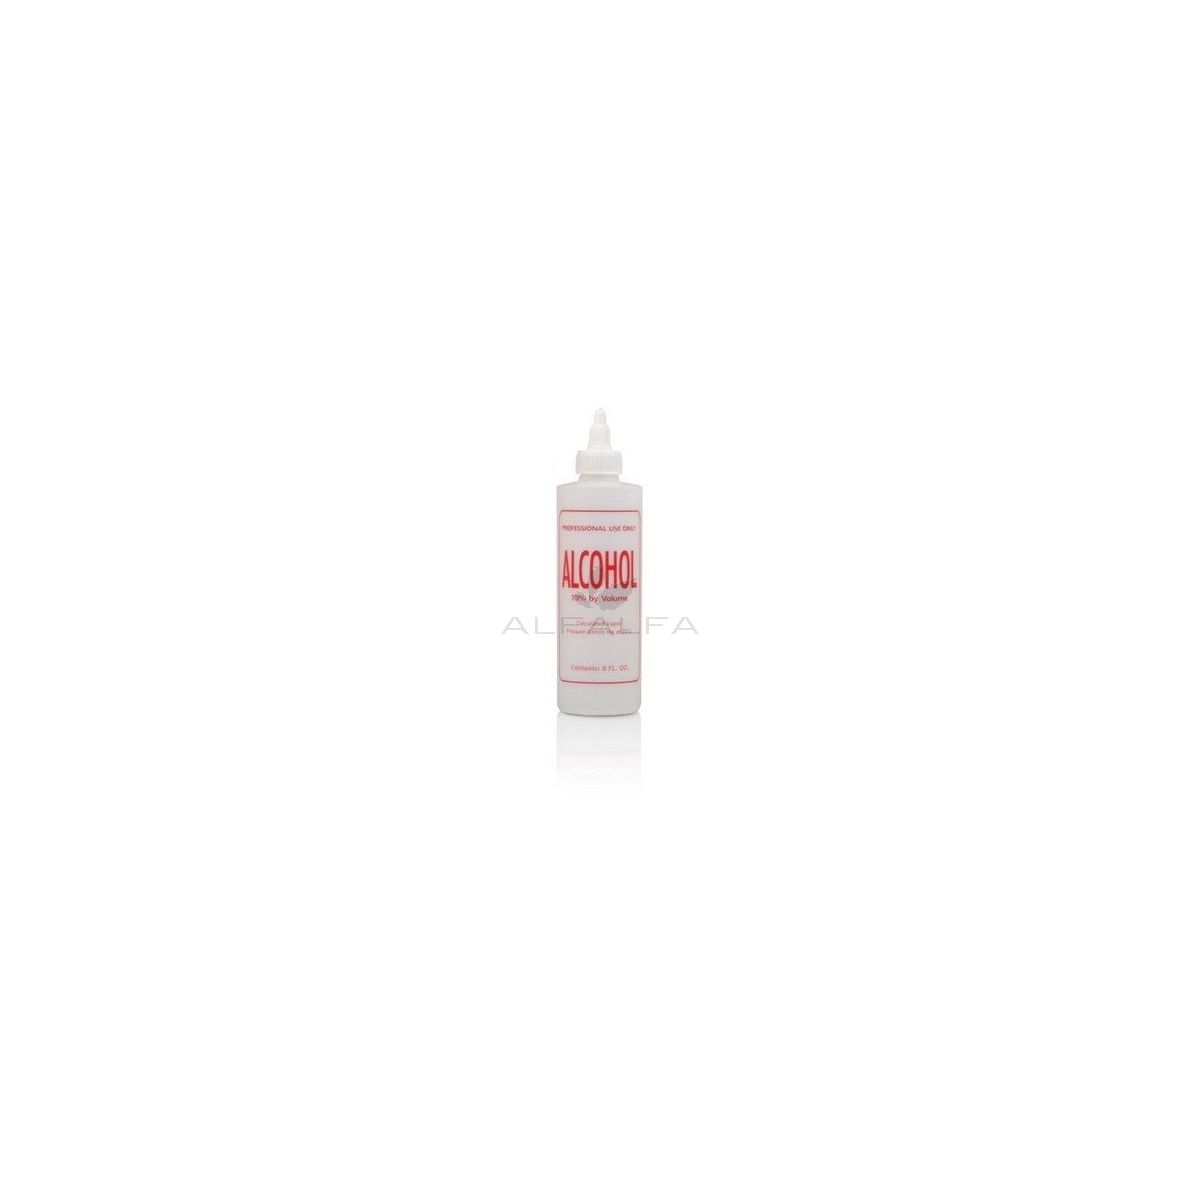 Cuticle Oil - Labeled Empty Squeeze Bottle (610355)